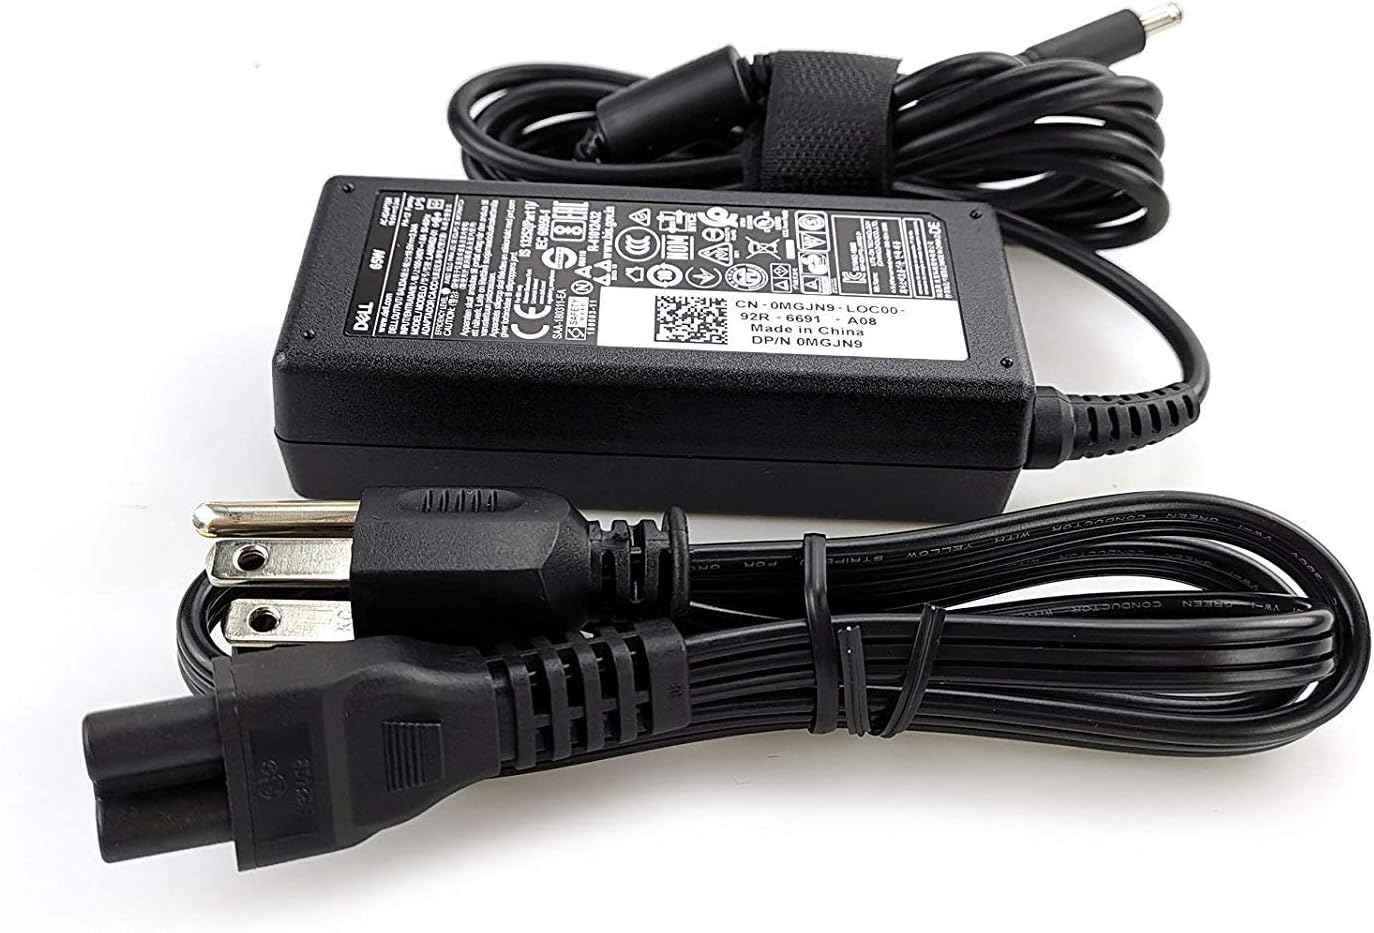 Dell 65 W Replacement AC Adapter for Dell Optiplex 3020 Micro, Dell OptiPlex 7040 Micro, Dell OptiPlex 9020 Micro, Dell Vostro 2420, Dell Vostro 2520, Dell Vostro 3360, Dell XPS 14 (L412z).